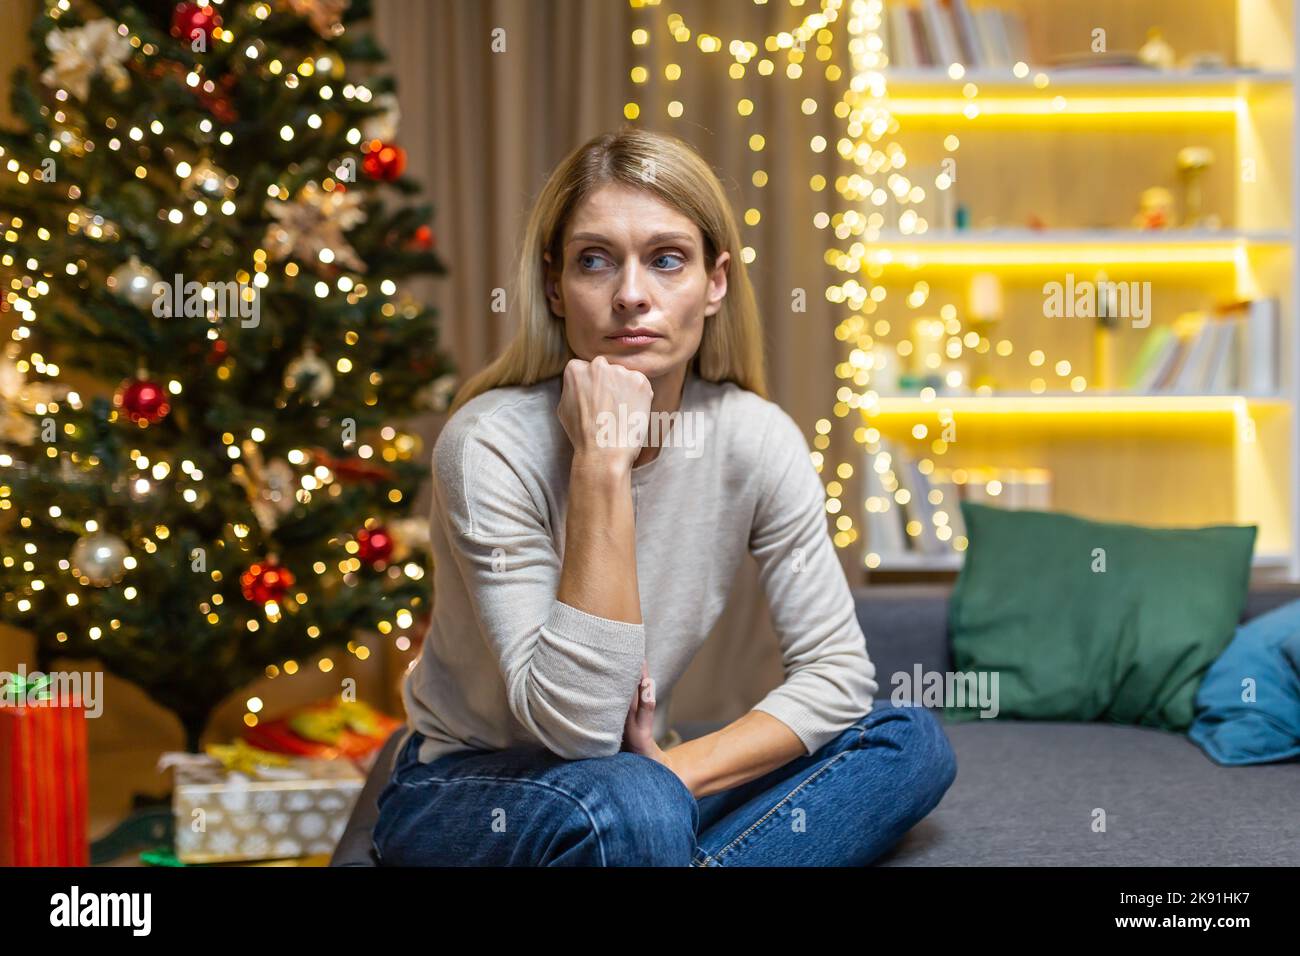 sad Woman alone at home for Christmas and New Year, sitting depressed near Christmas tree on sofa in living room, waiting for celebration. Stock Photo